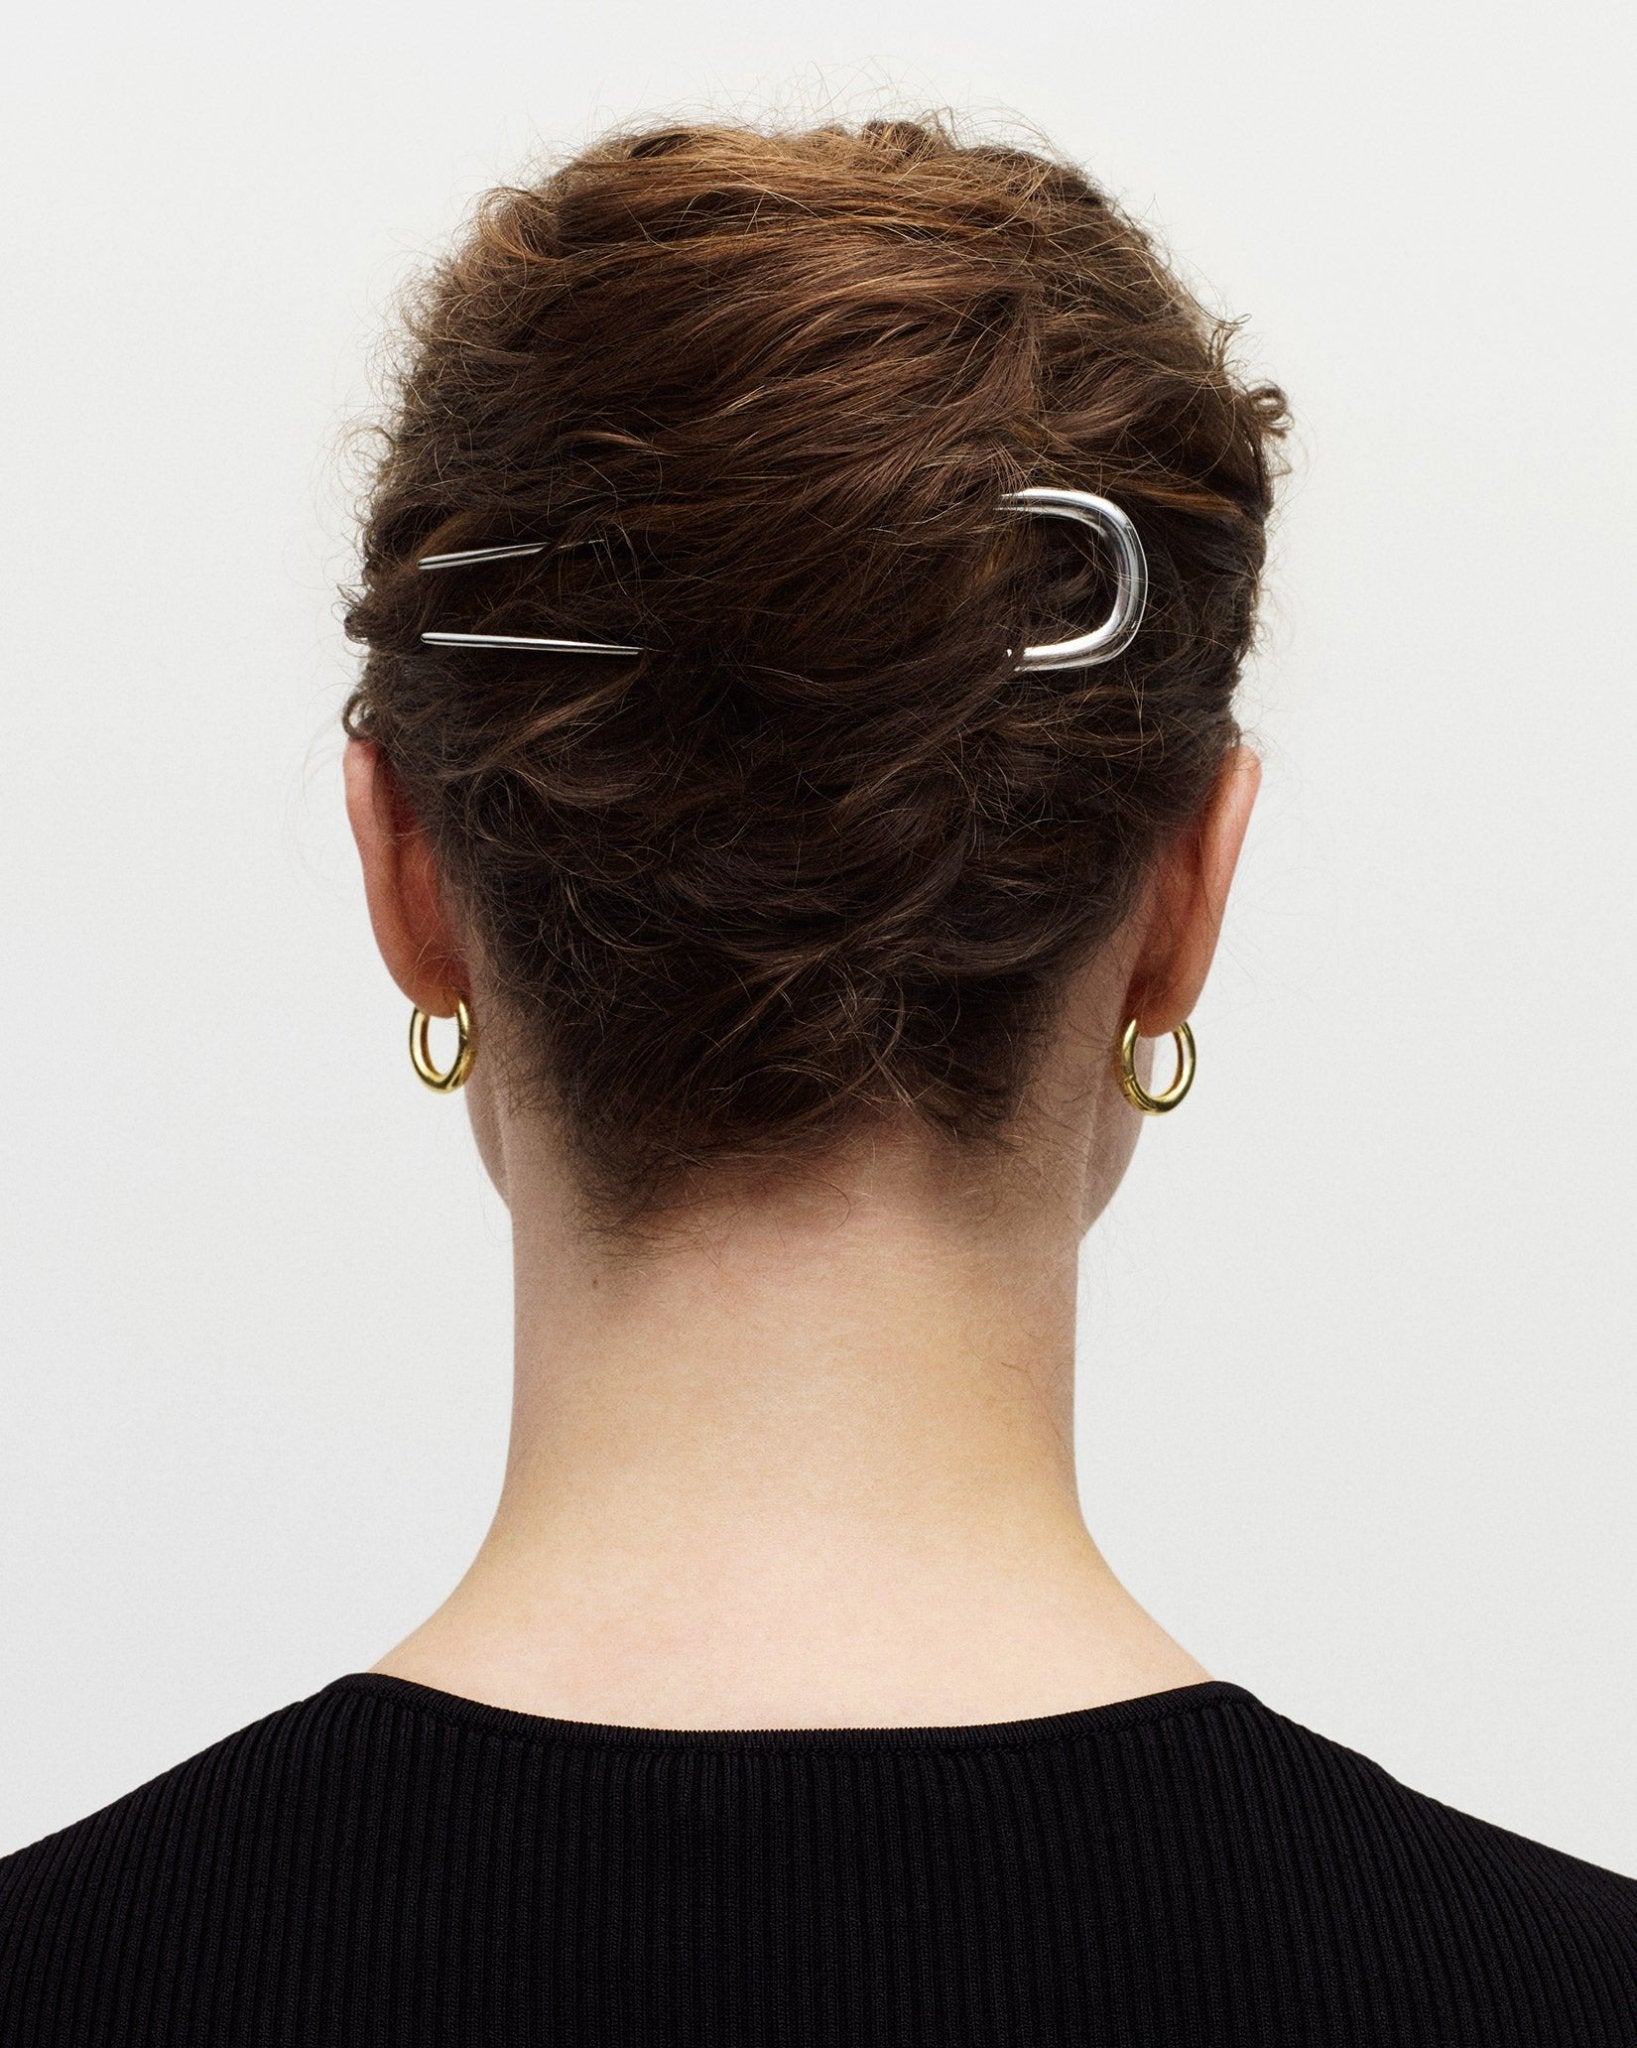 Midi Oval French Hair Pin in Silver